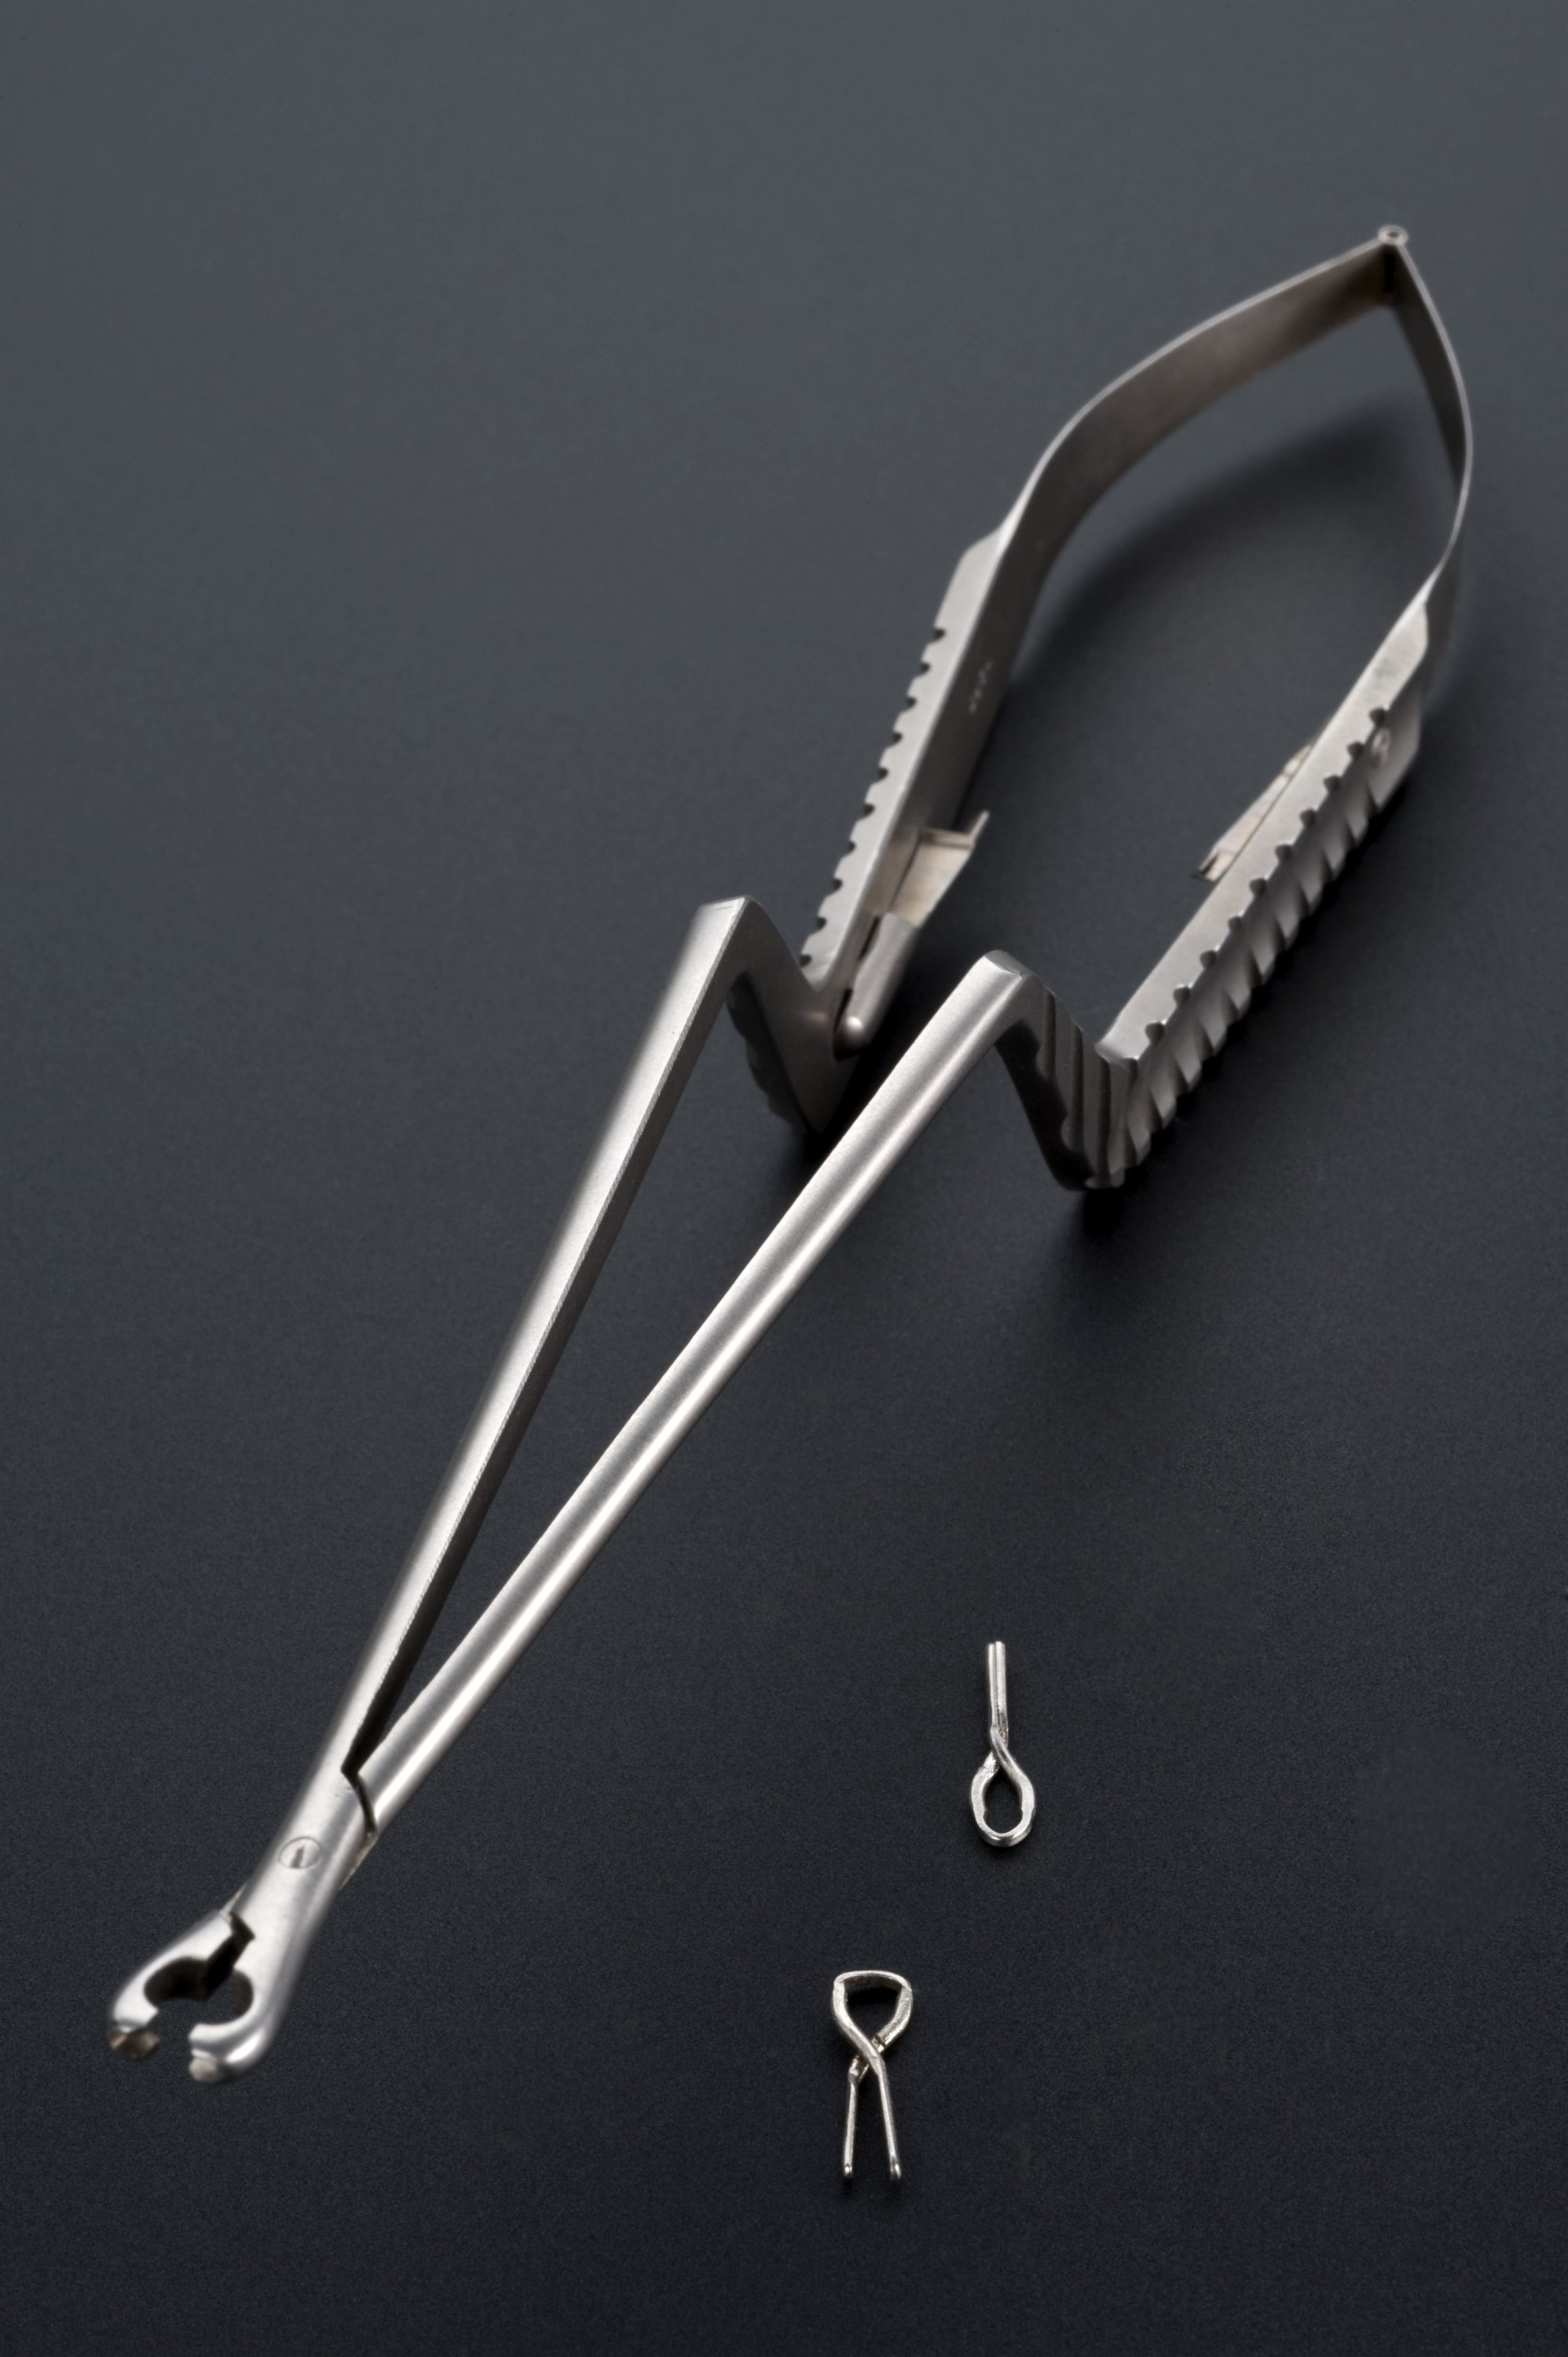 Compression forceps for Yaşargil clips, developed by Yaşargil himself to treat aneurysms, seen in Tuttlingen, Germany. (Science Museum London/Wellcome Images via WIKIMEDIA COMMONS)